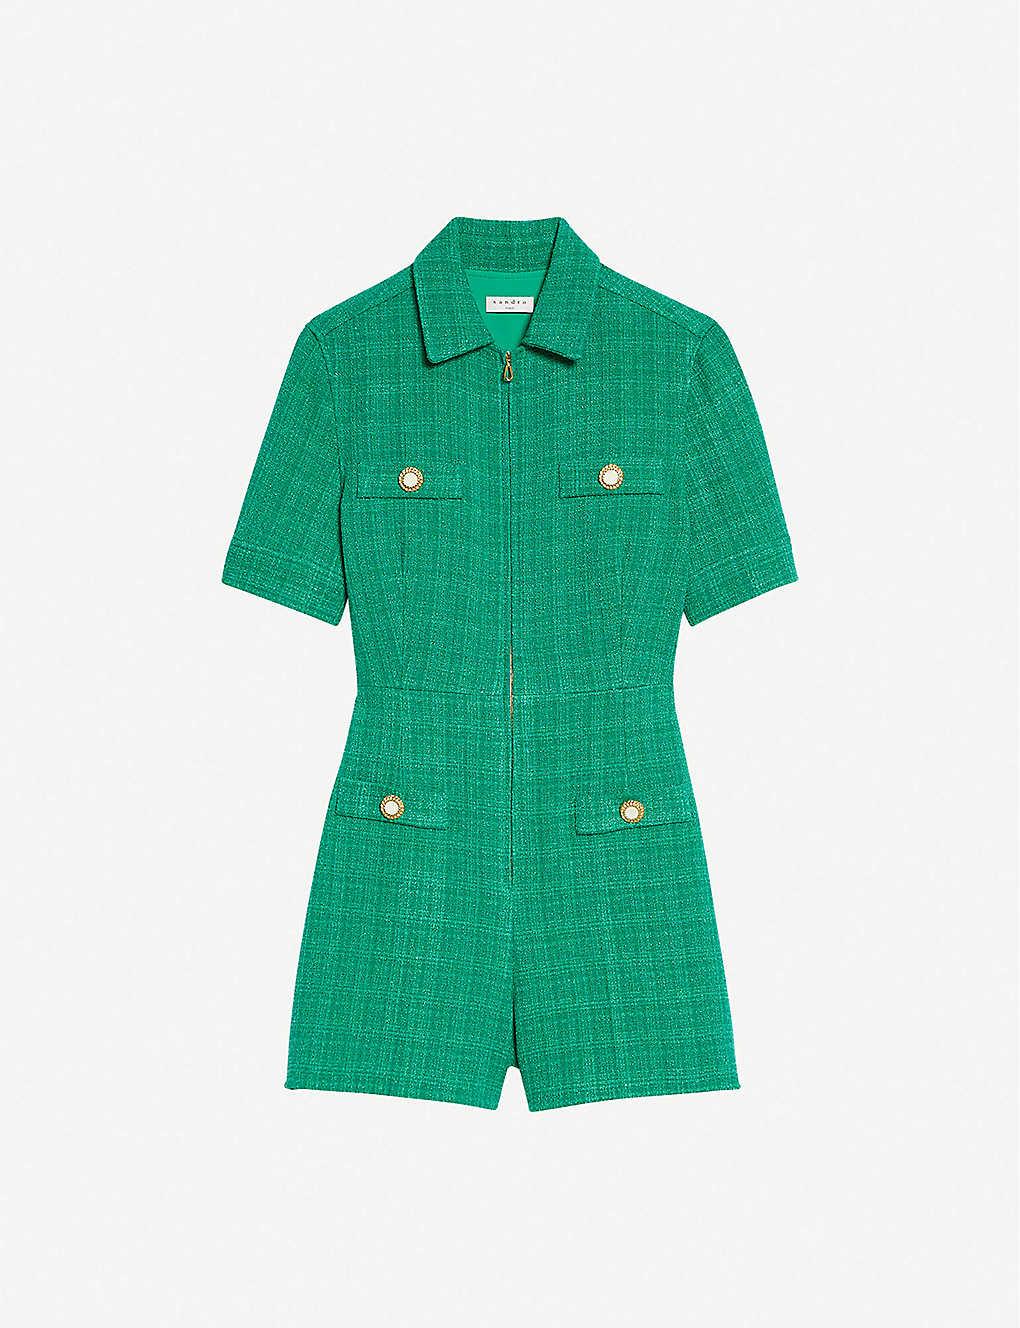 Sandro Jacky Zipped Tweed Playsuit in Green | Lyst